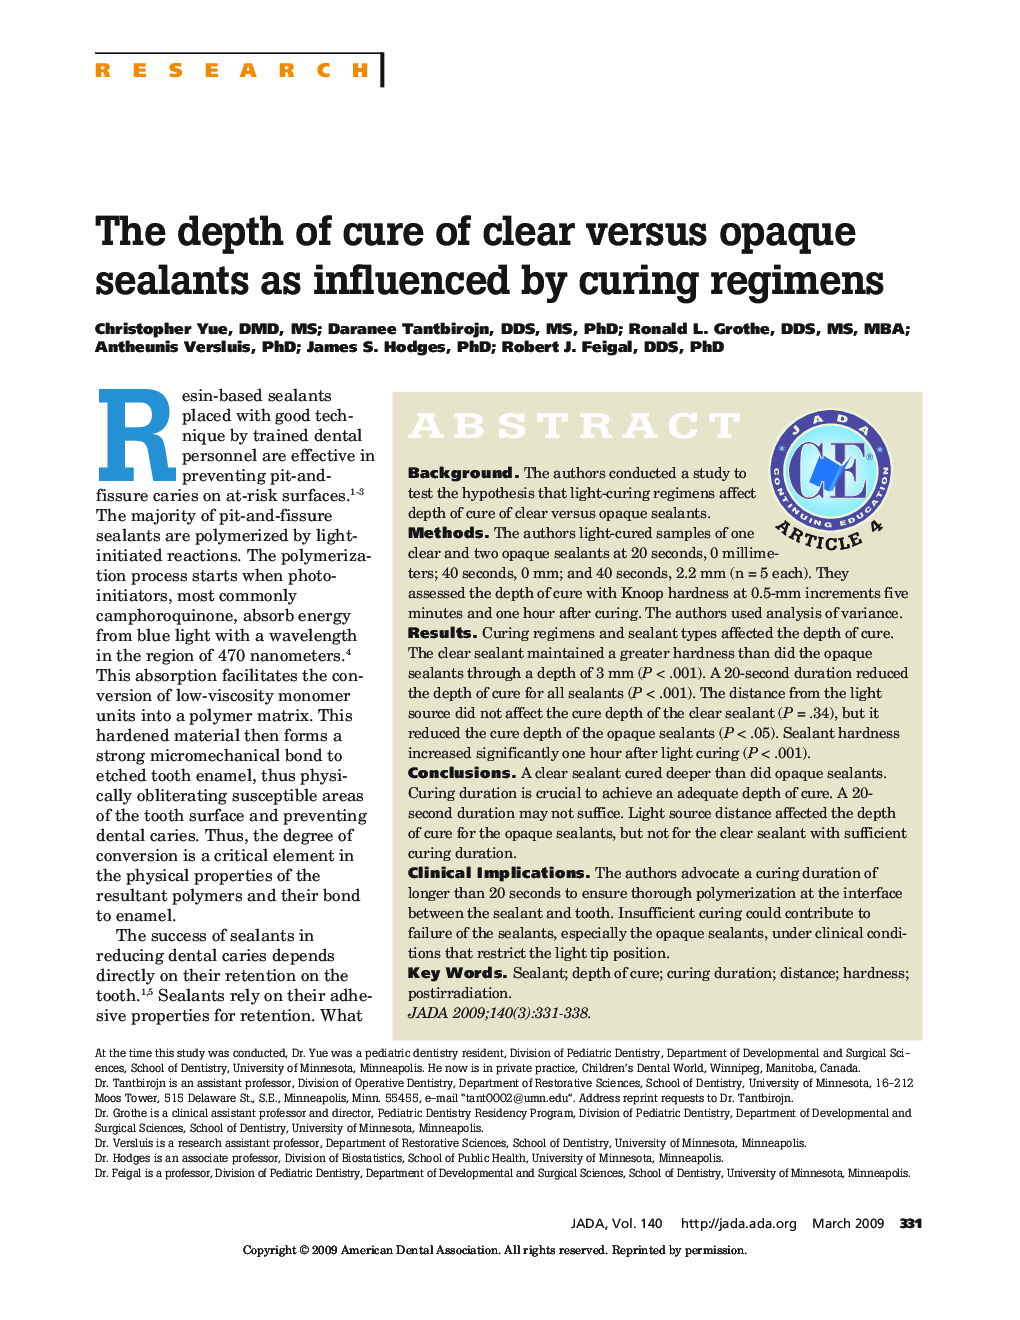 The Depth of Cure of Clear Versus Opaque Sealants as Influenced by Curing Regimens